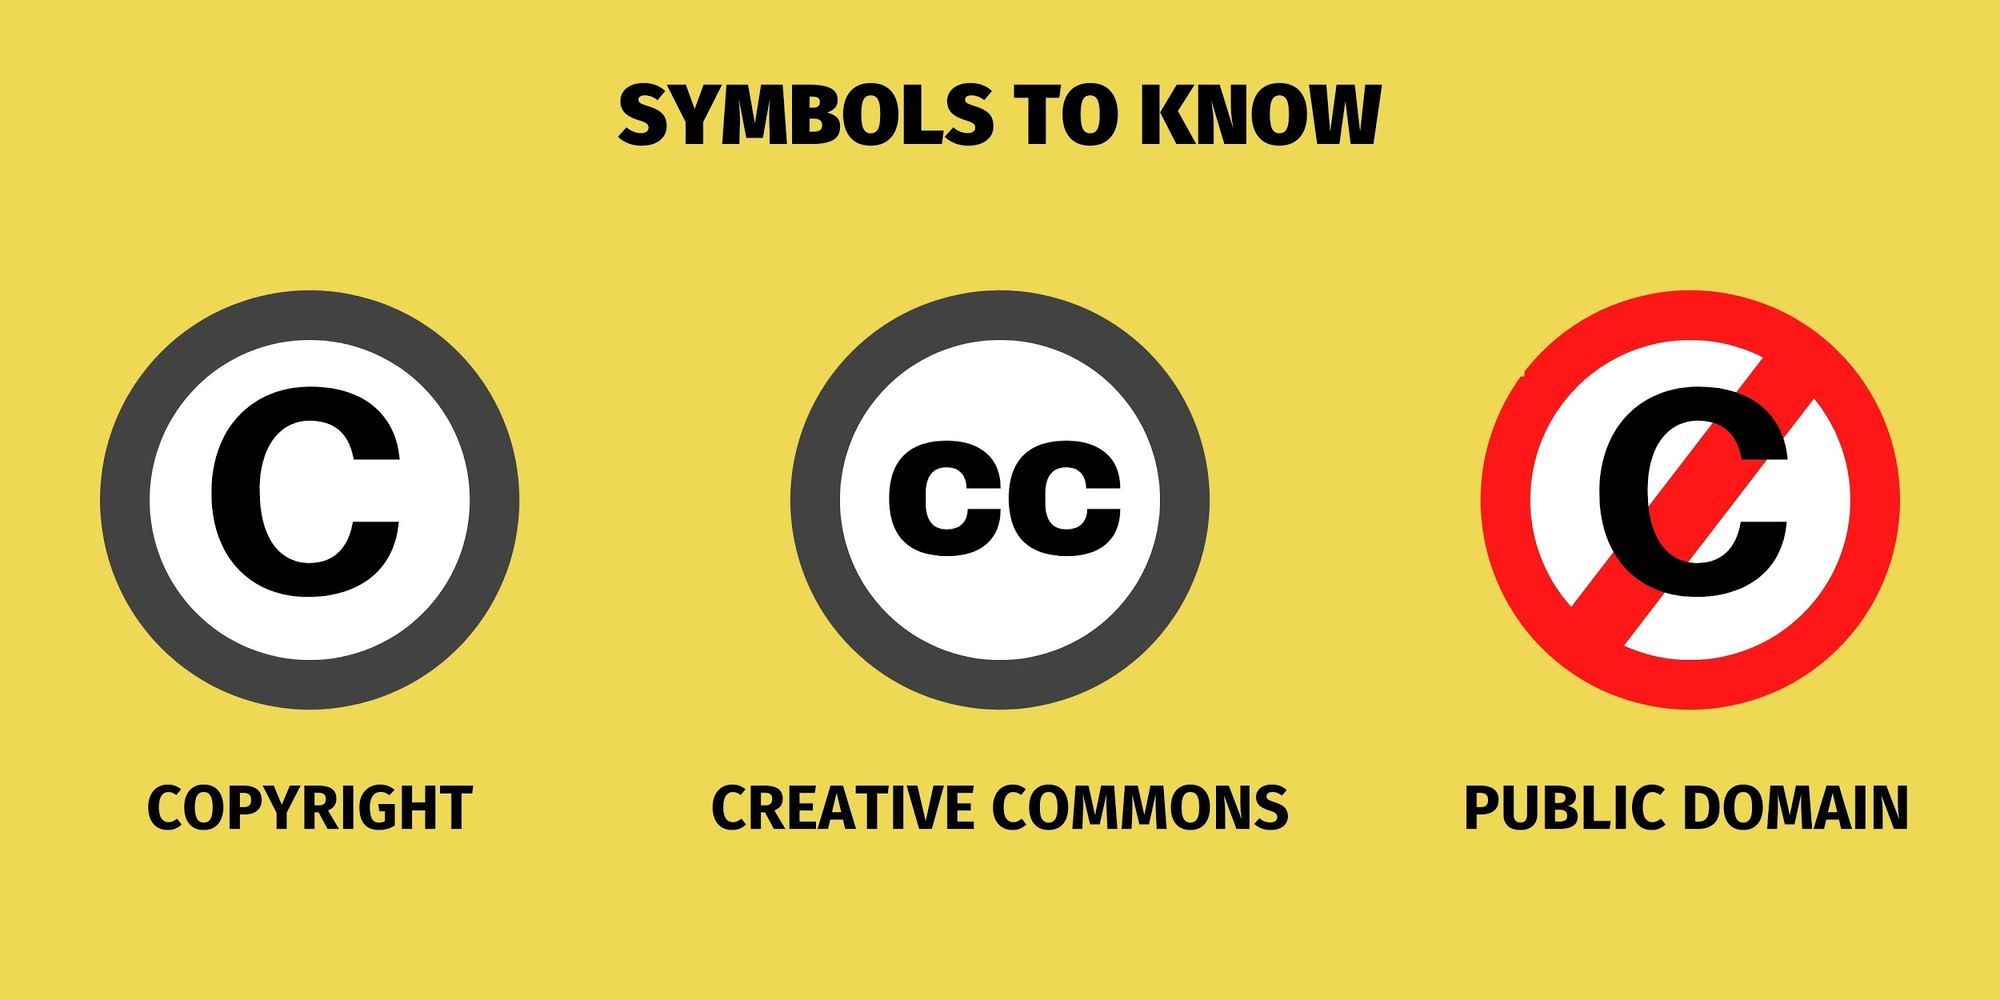 How to post music on Facebook without Copyright : Symbols to identify licensing of music